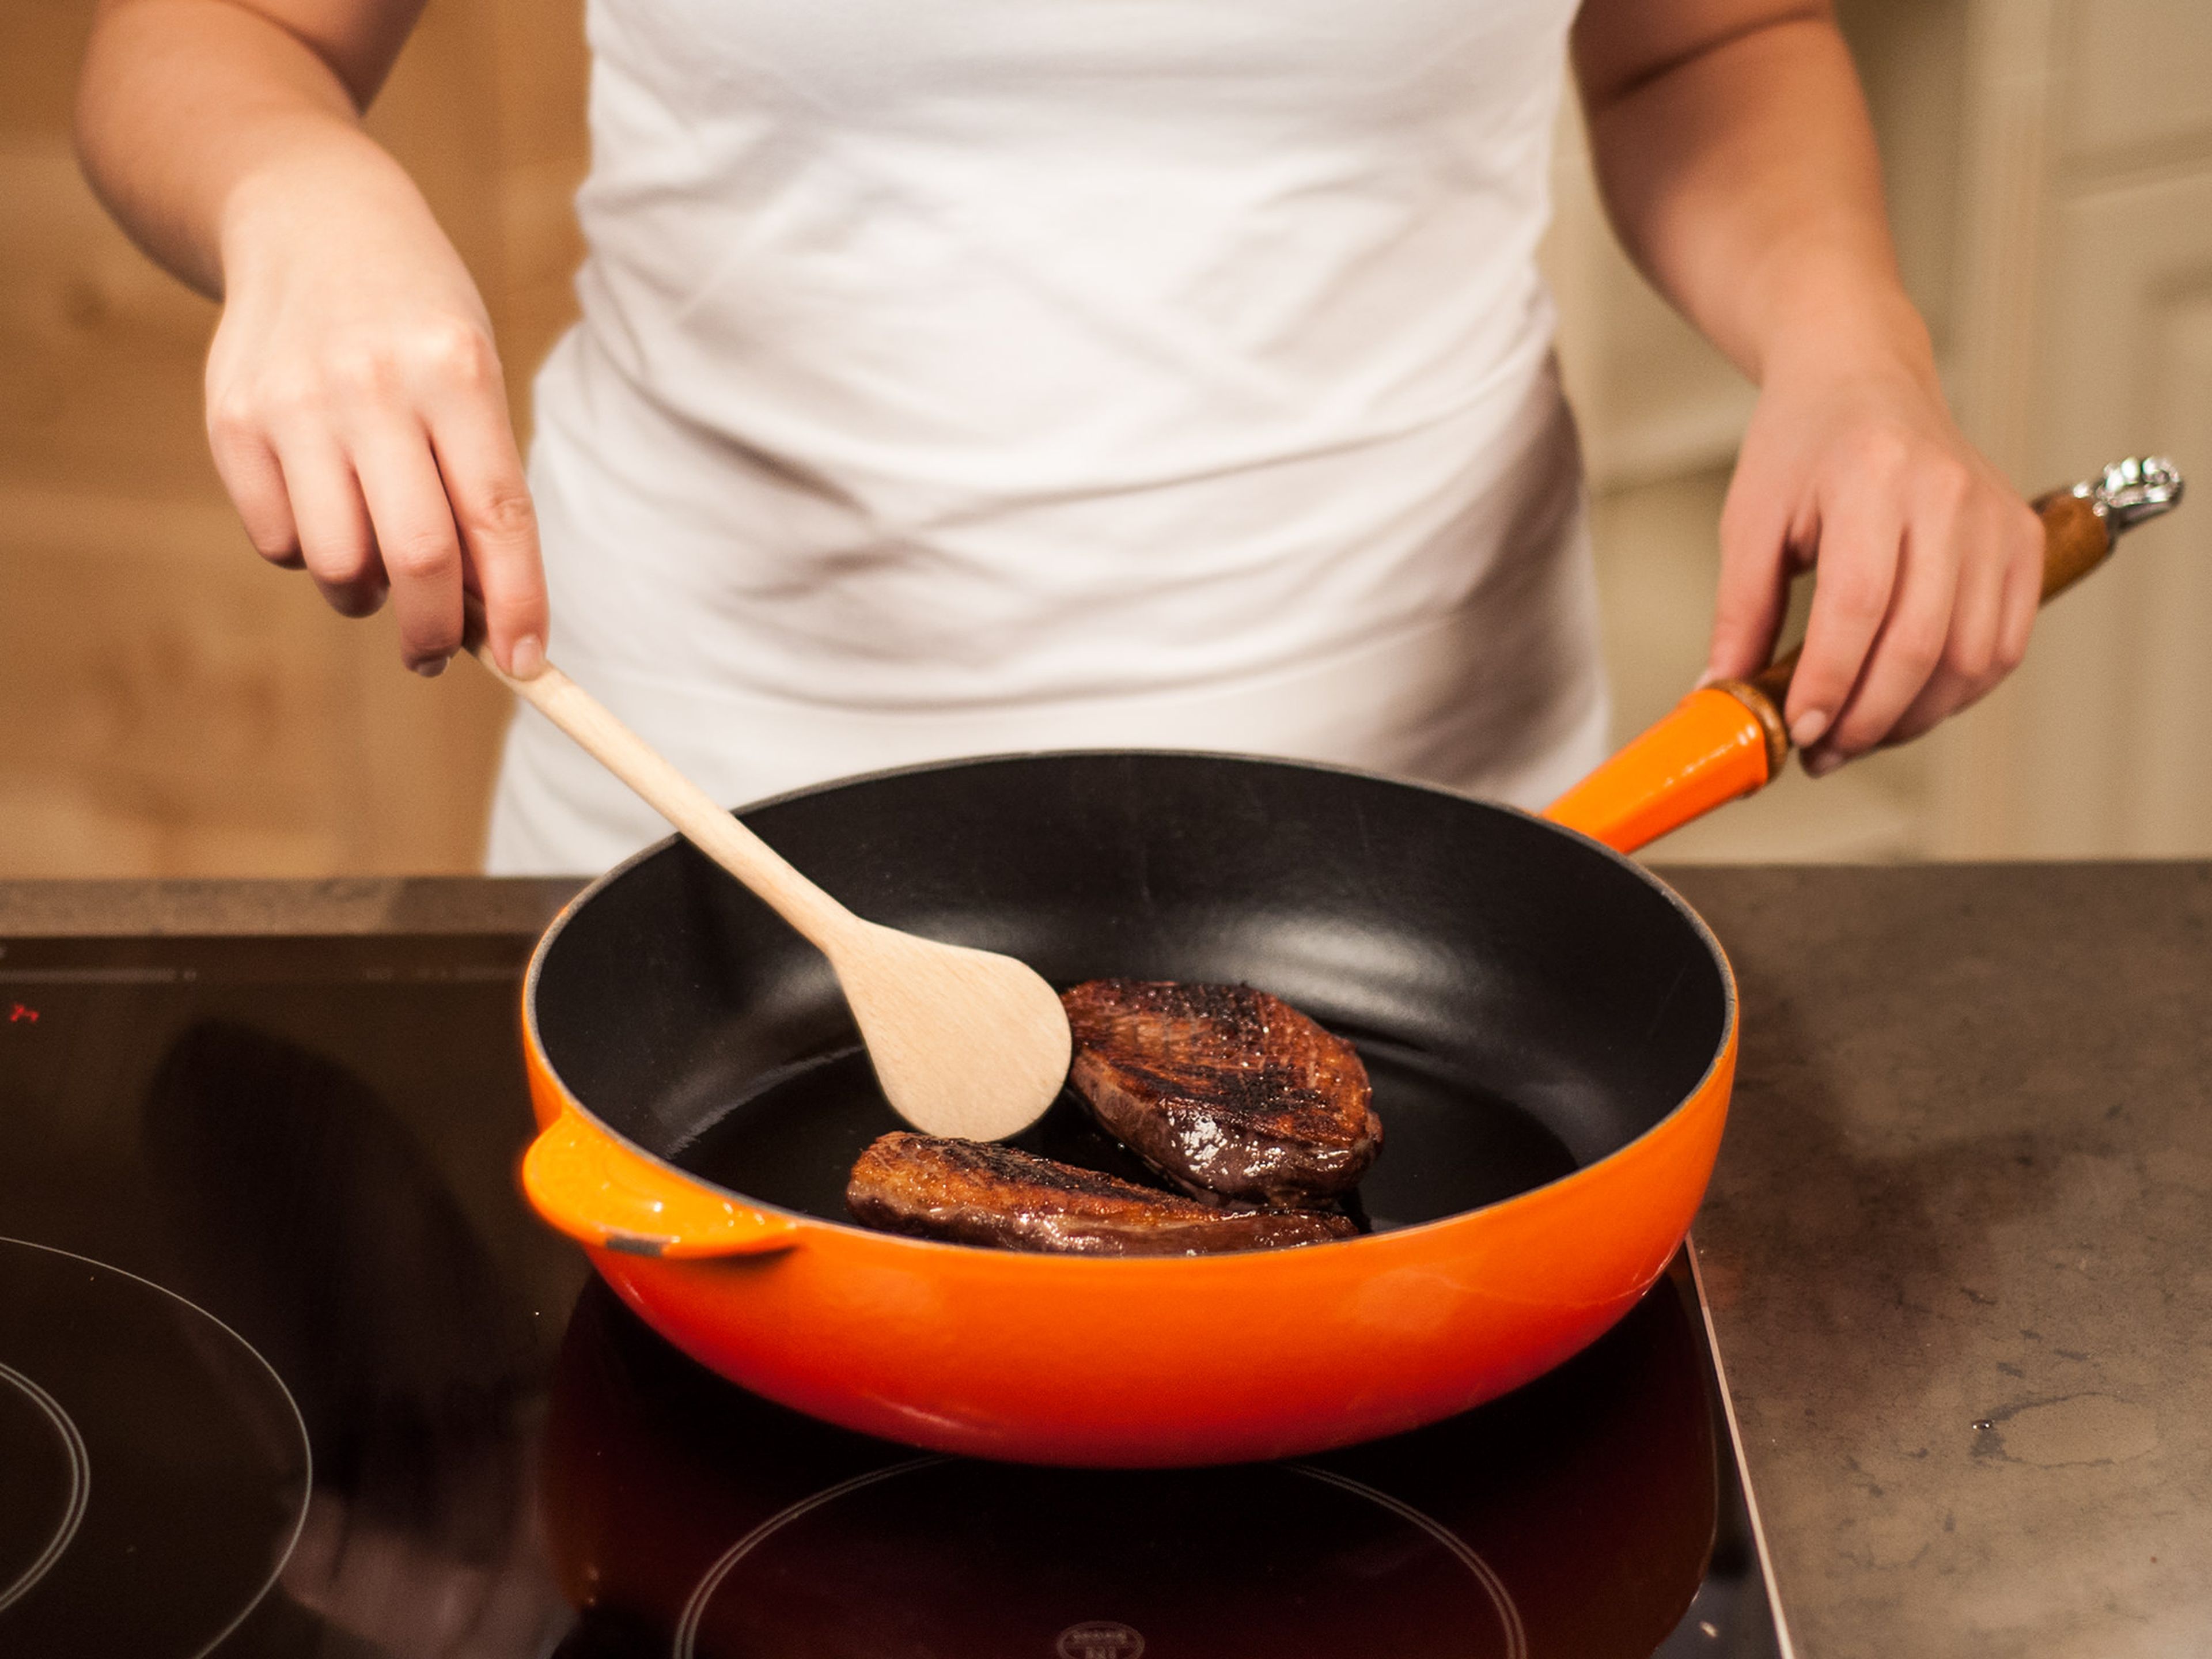 Remove duck breasts from the oven. Add some oil to a large frying pan and crisp duck in hot oil on both sides, starting with the skin-side down. Fry for 1 – 2 min. on each side until cooked to the desired degree.